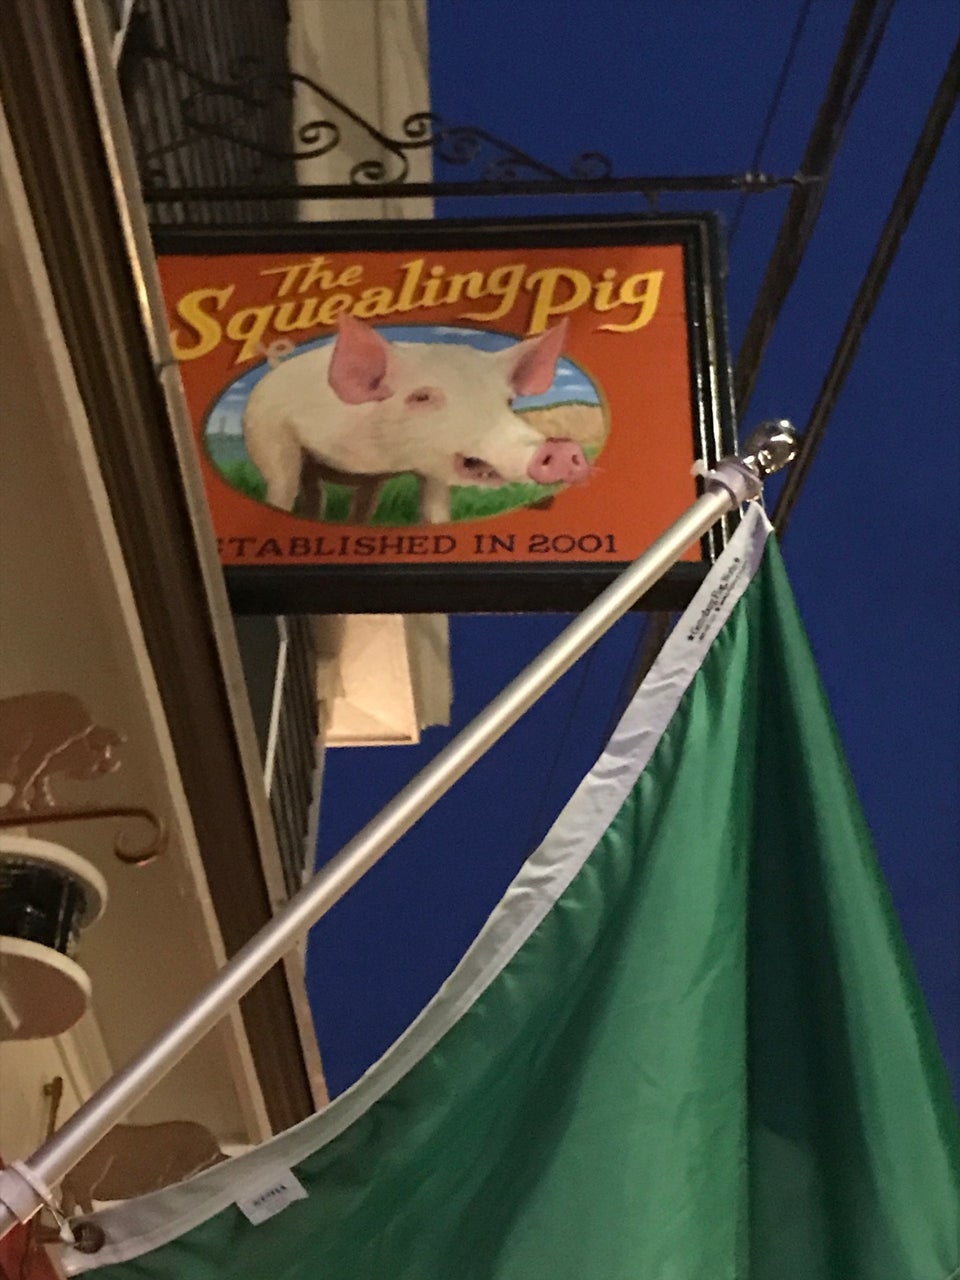 Photo of The Squealing Pig